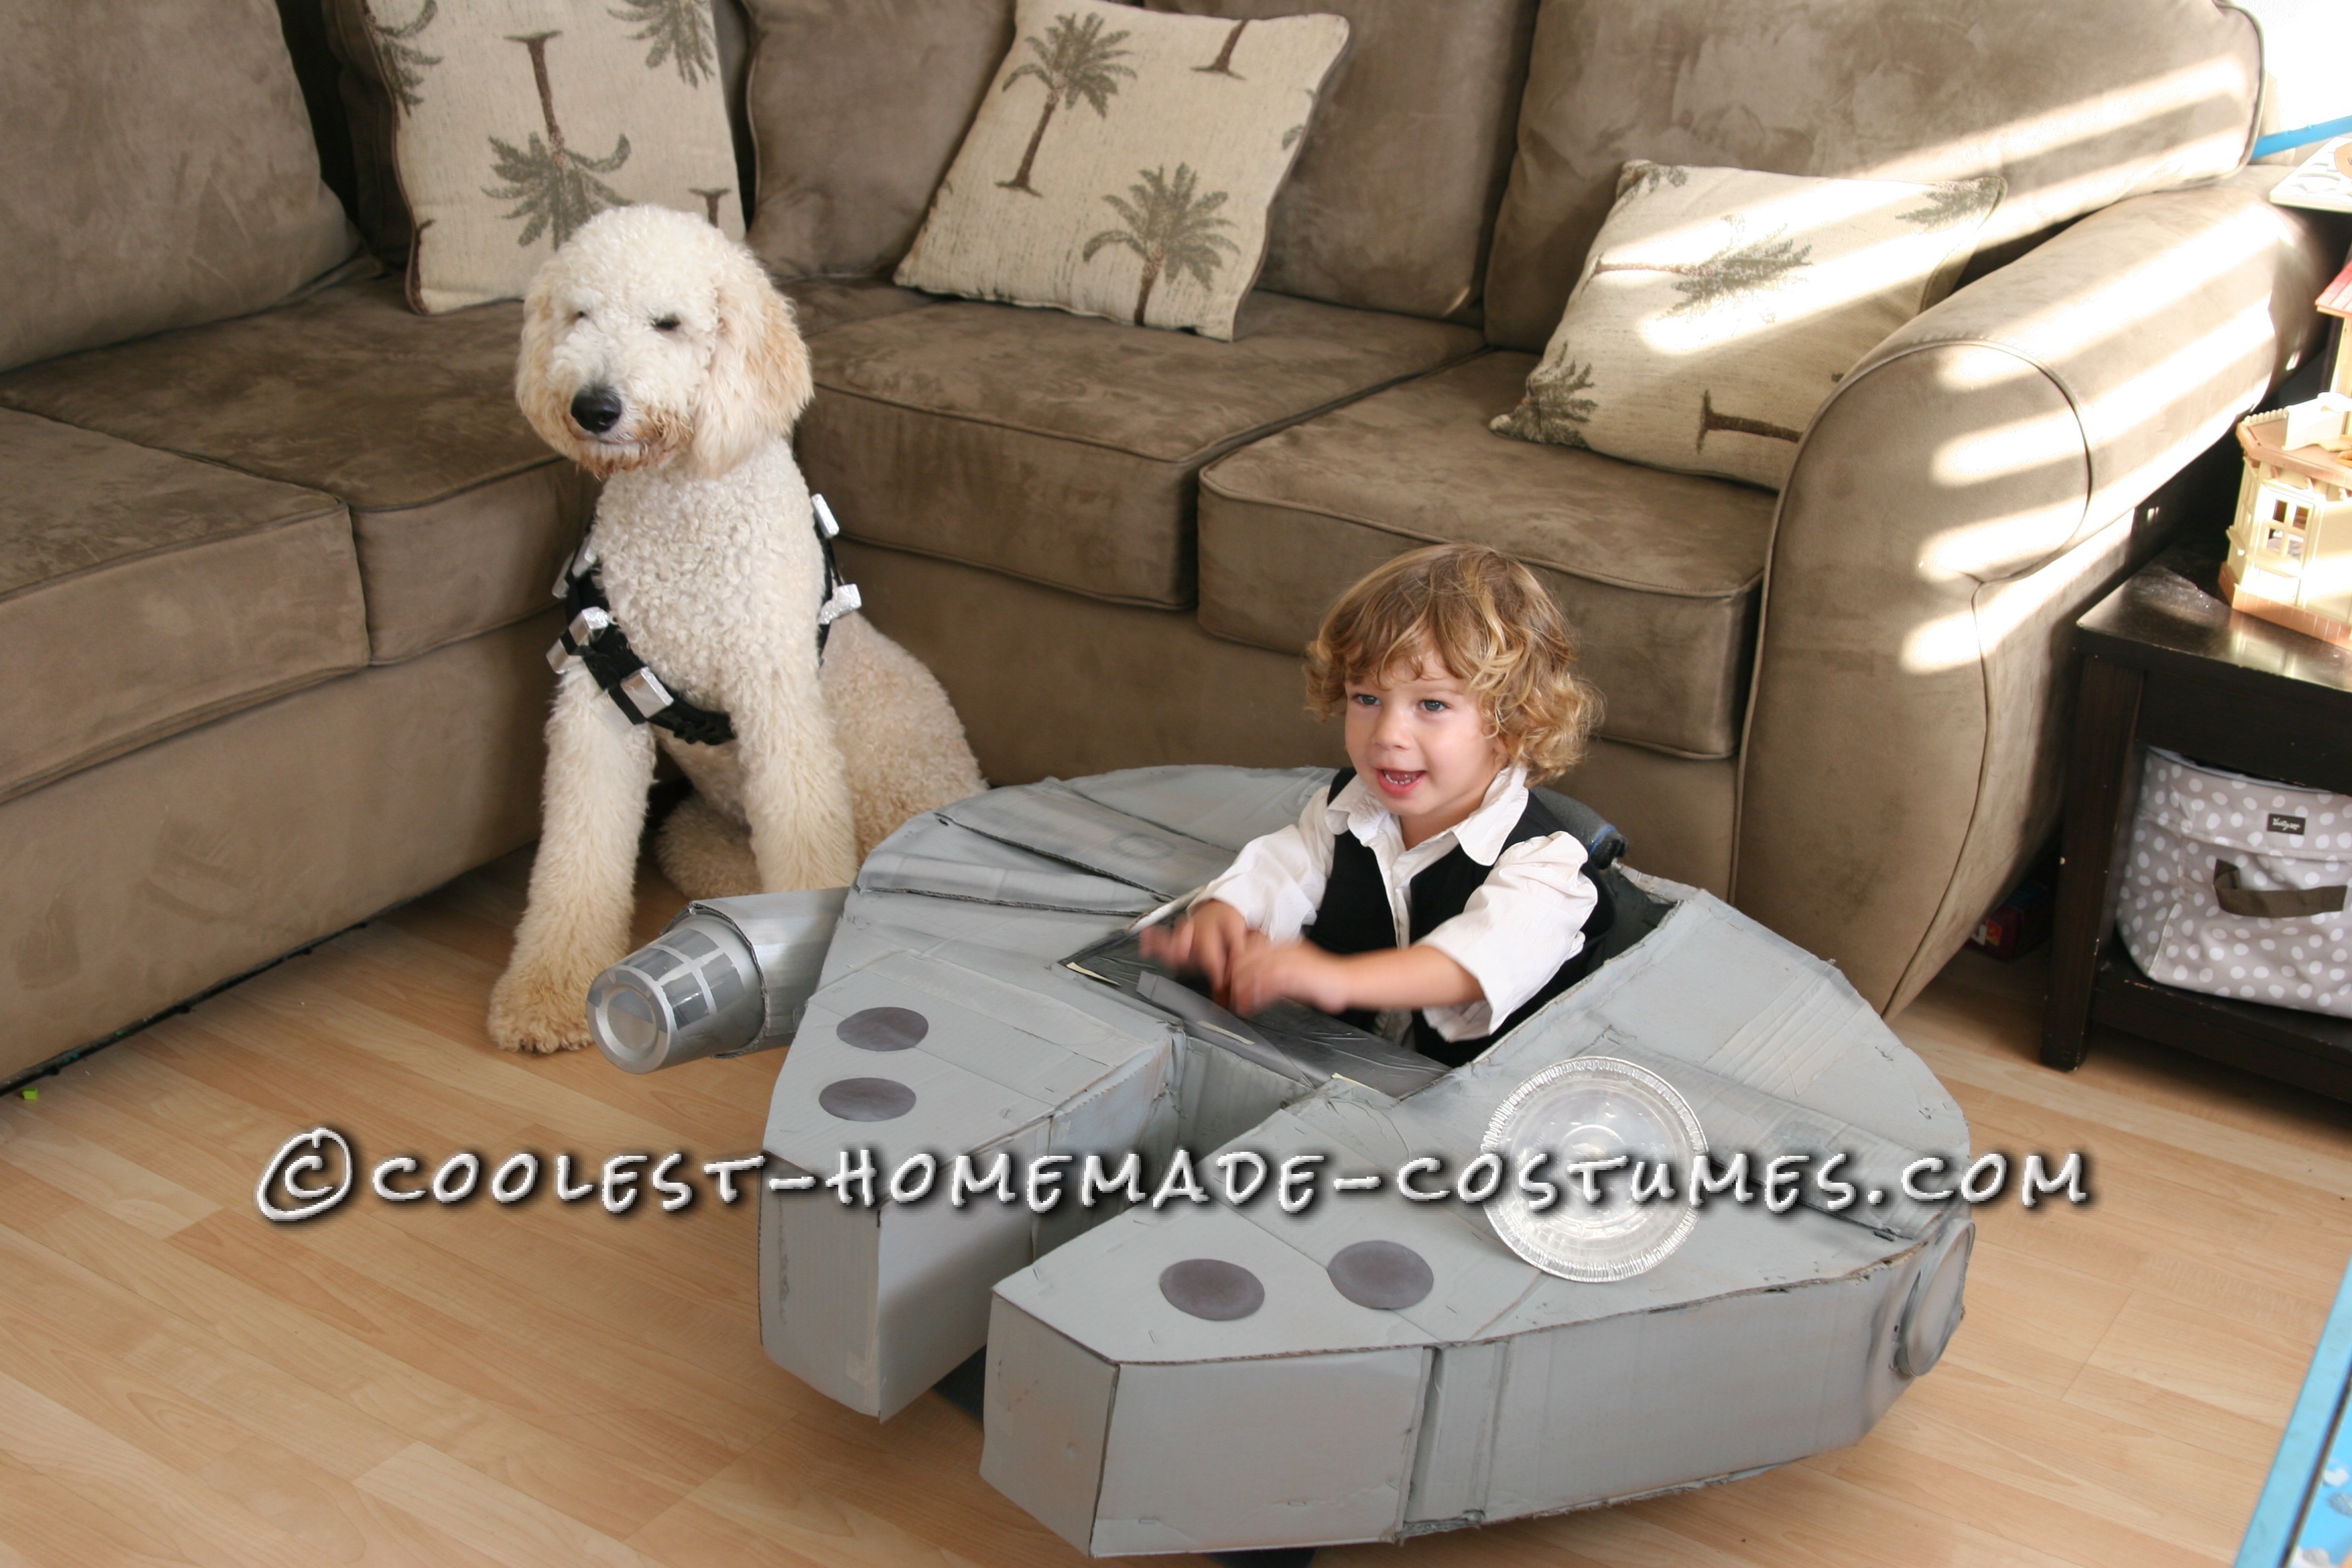 Cool Han Solo Costume, His Ship and His Wookie